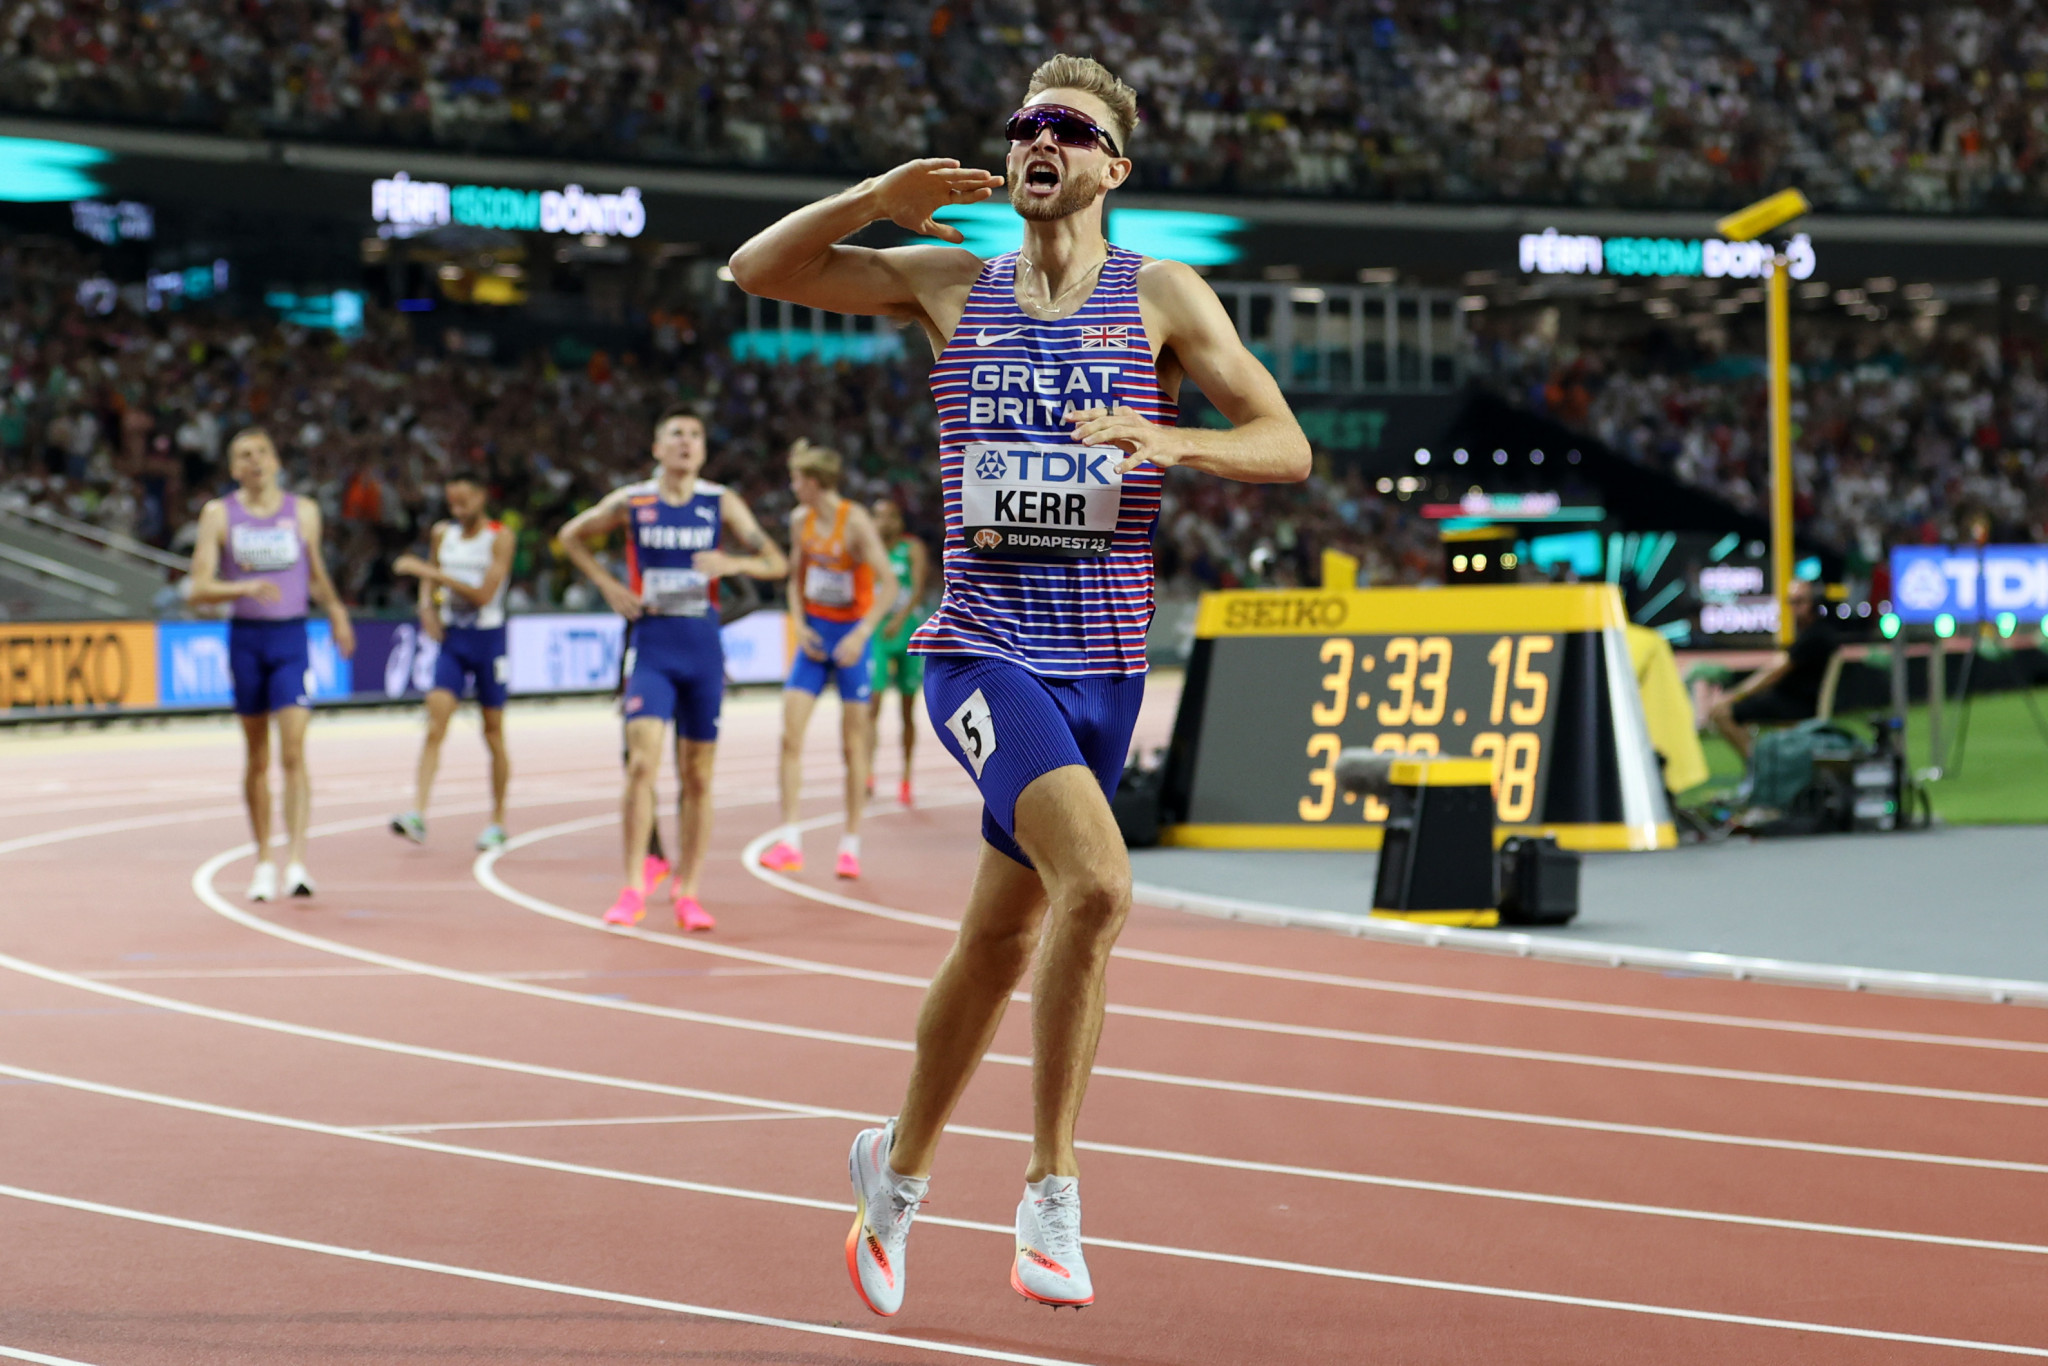 Josh Kerr of Britain celebrated winning men's 1500m gold one year on from his team-mate Jake Wightman's sublime victory in Eugene ©Getty Images